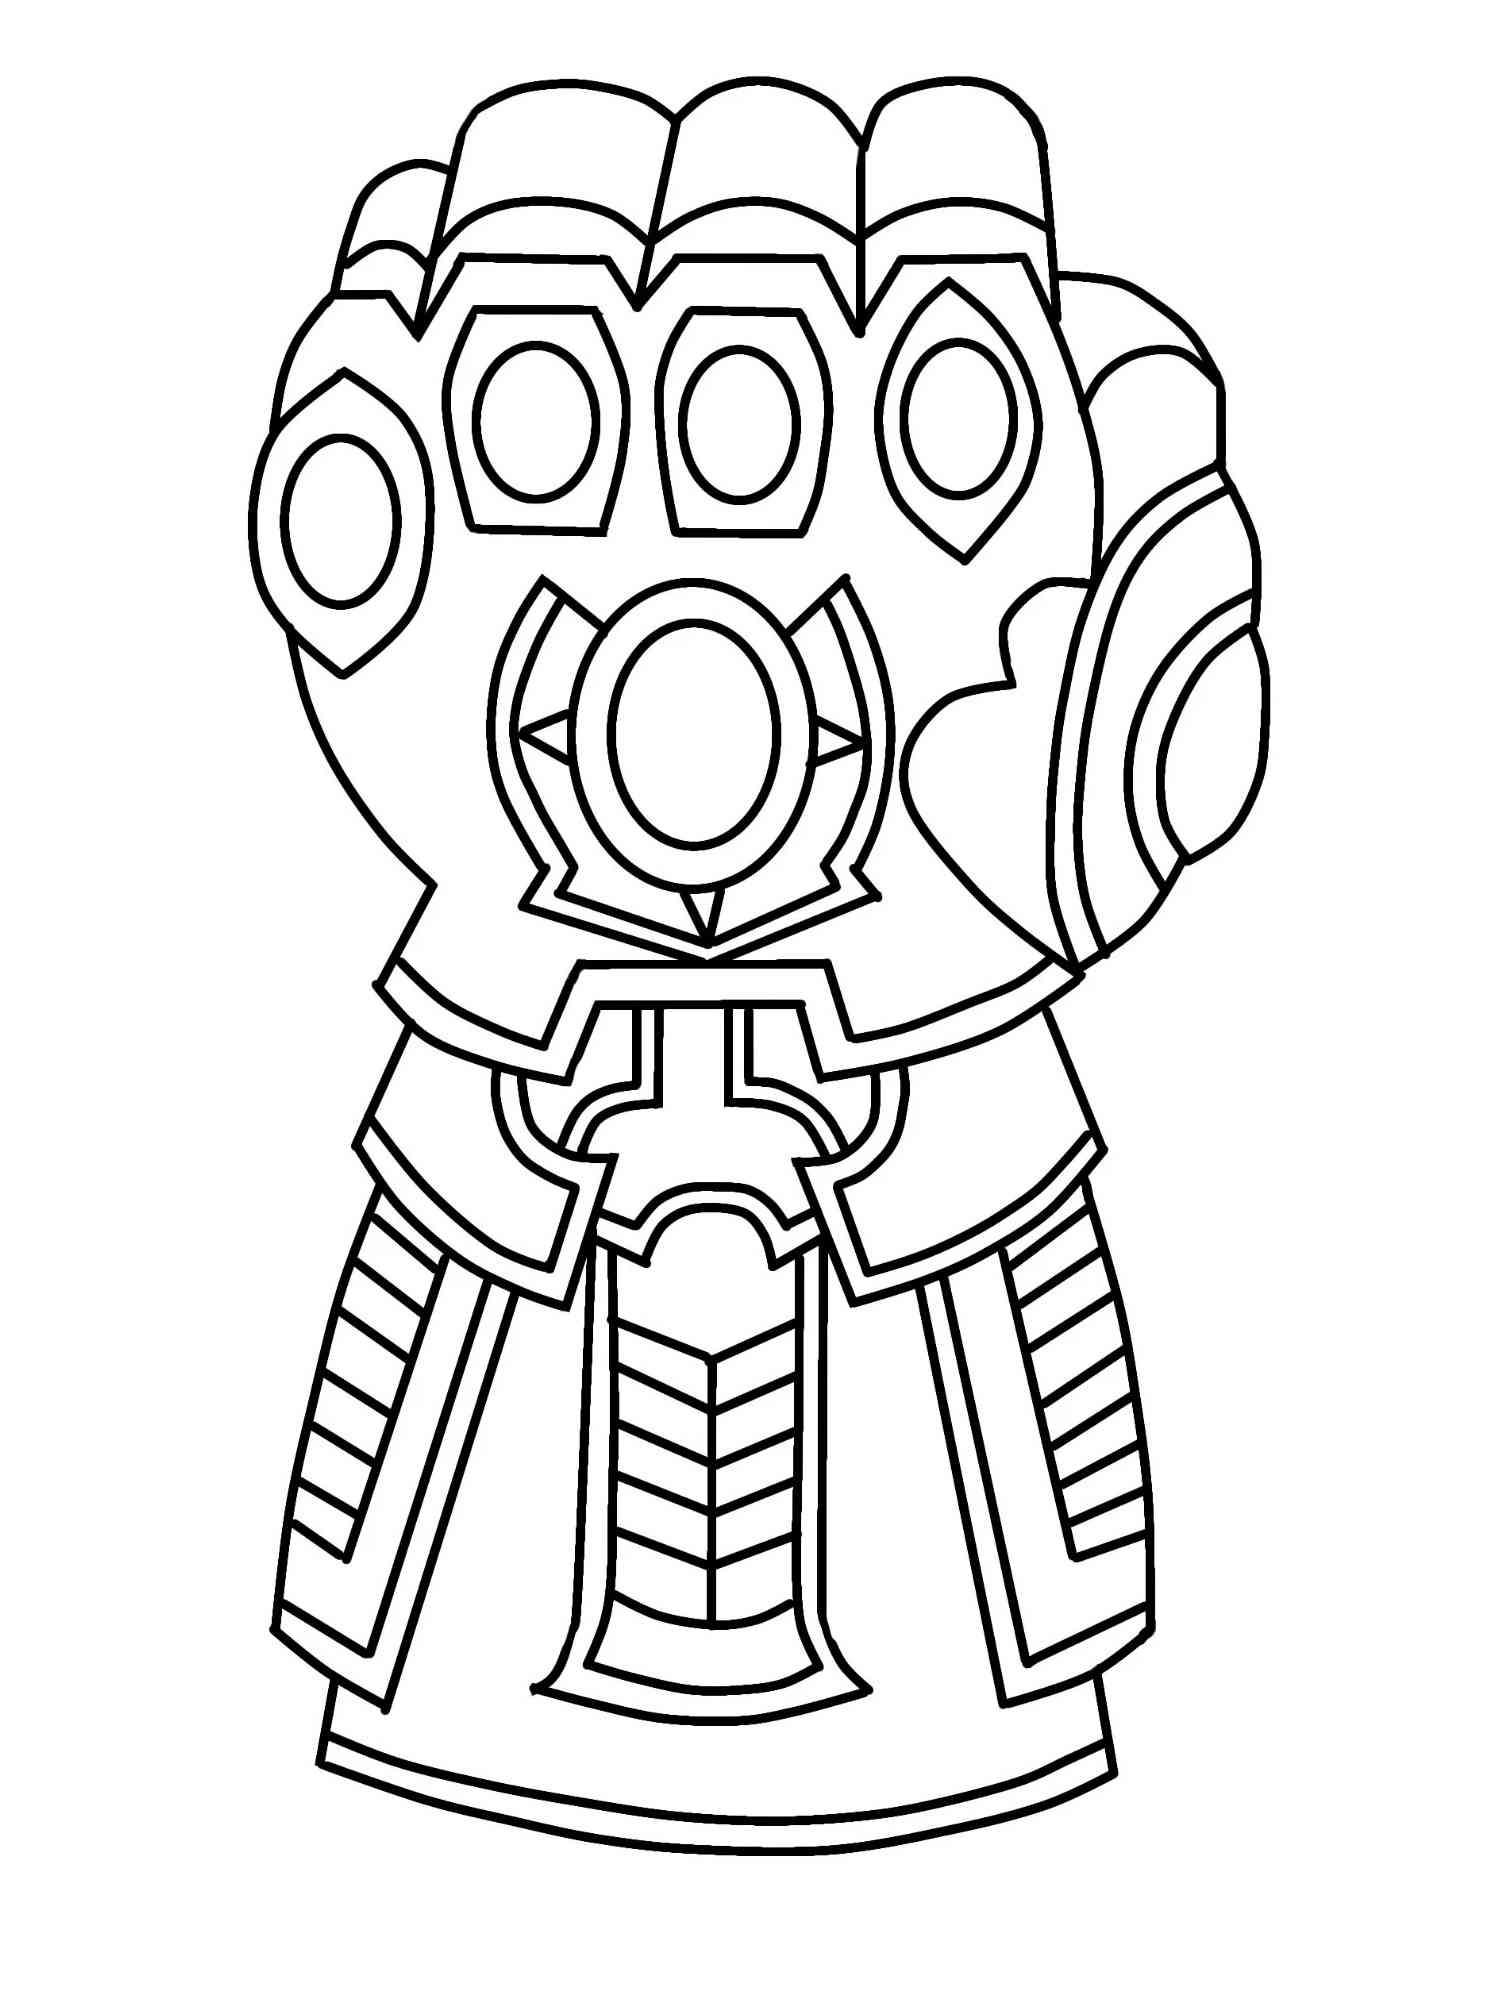 Infinity Gauntlet 9 coloring page